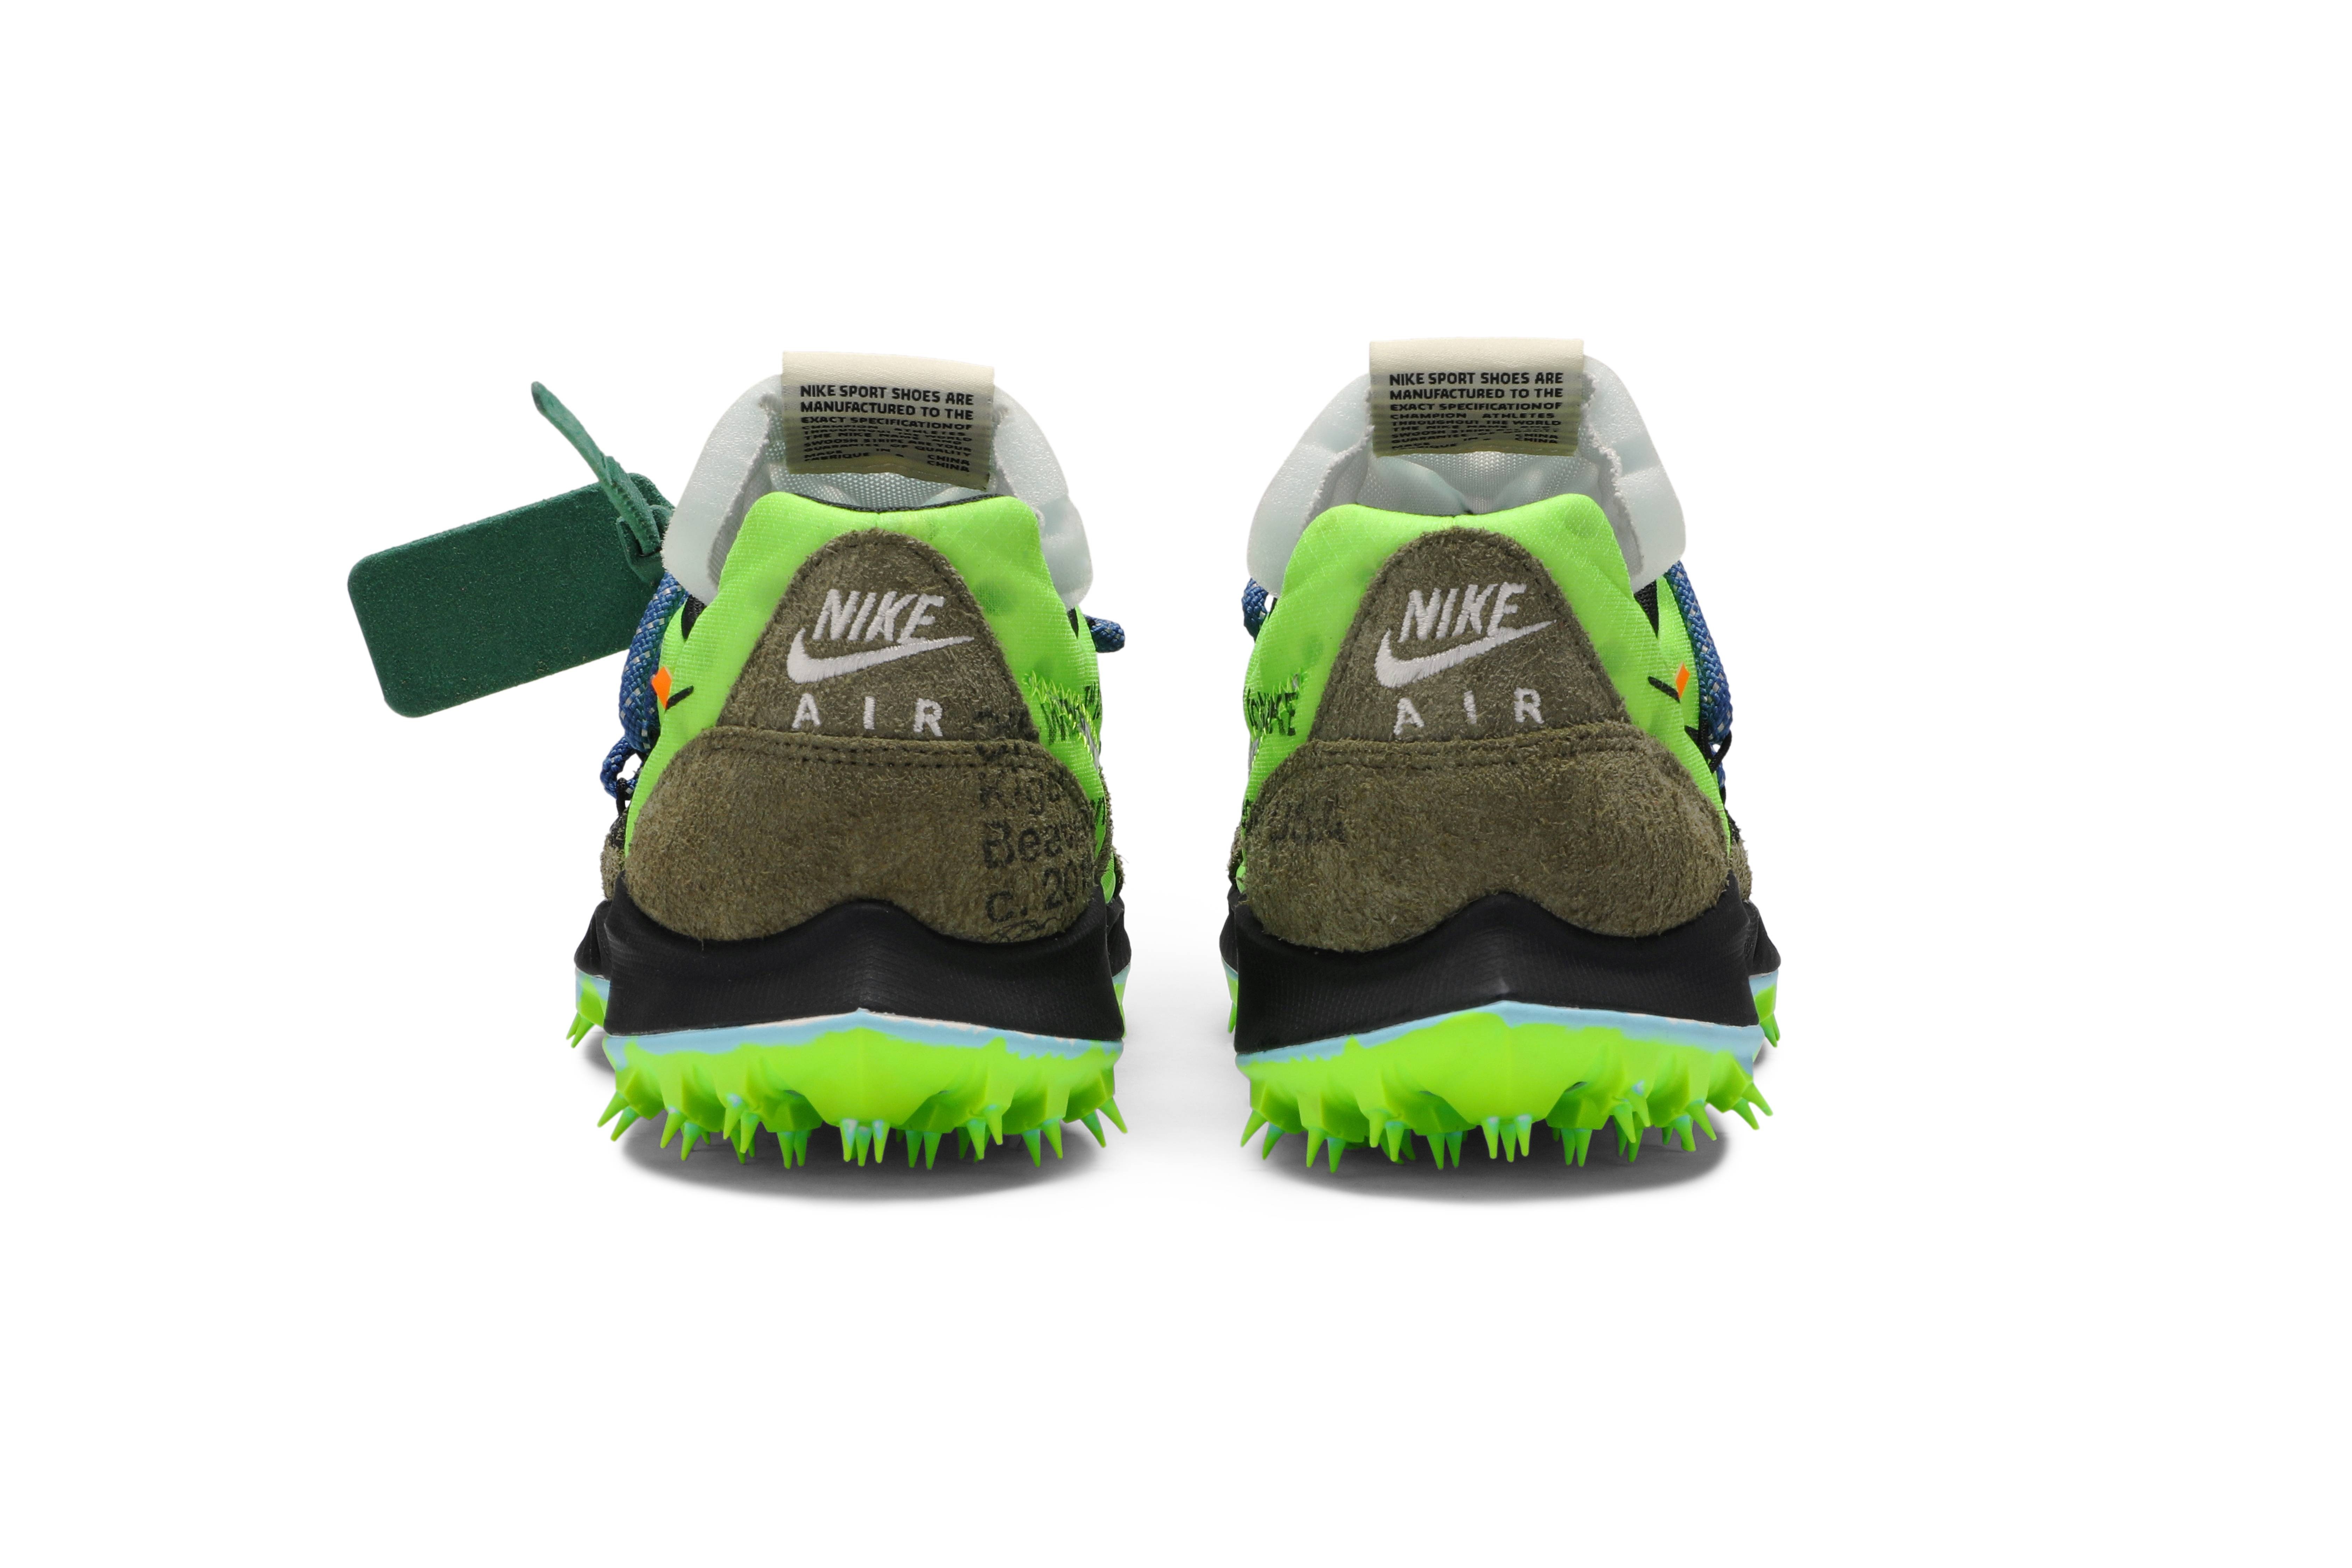 Off-White x Wmns Air Zoom Terra Kiger 5 'Athlete in Progress - Electric Green' - 6